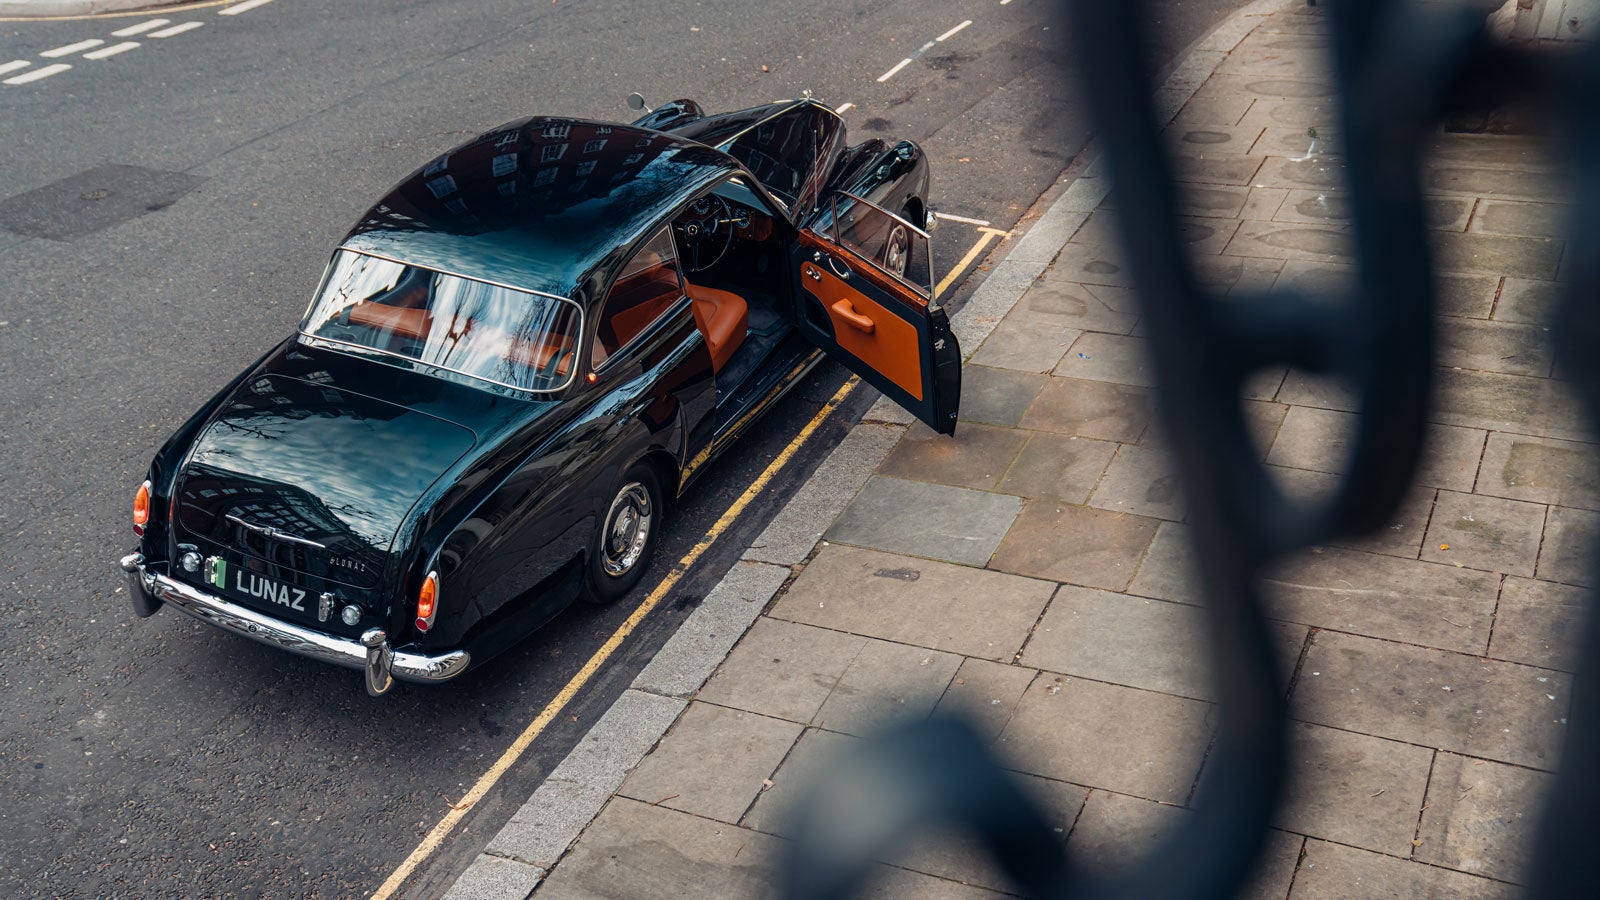 This One-of-a-Kind Bentley Conversion is the World’s Rarest EV